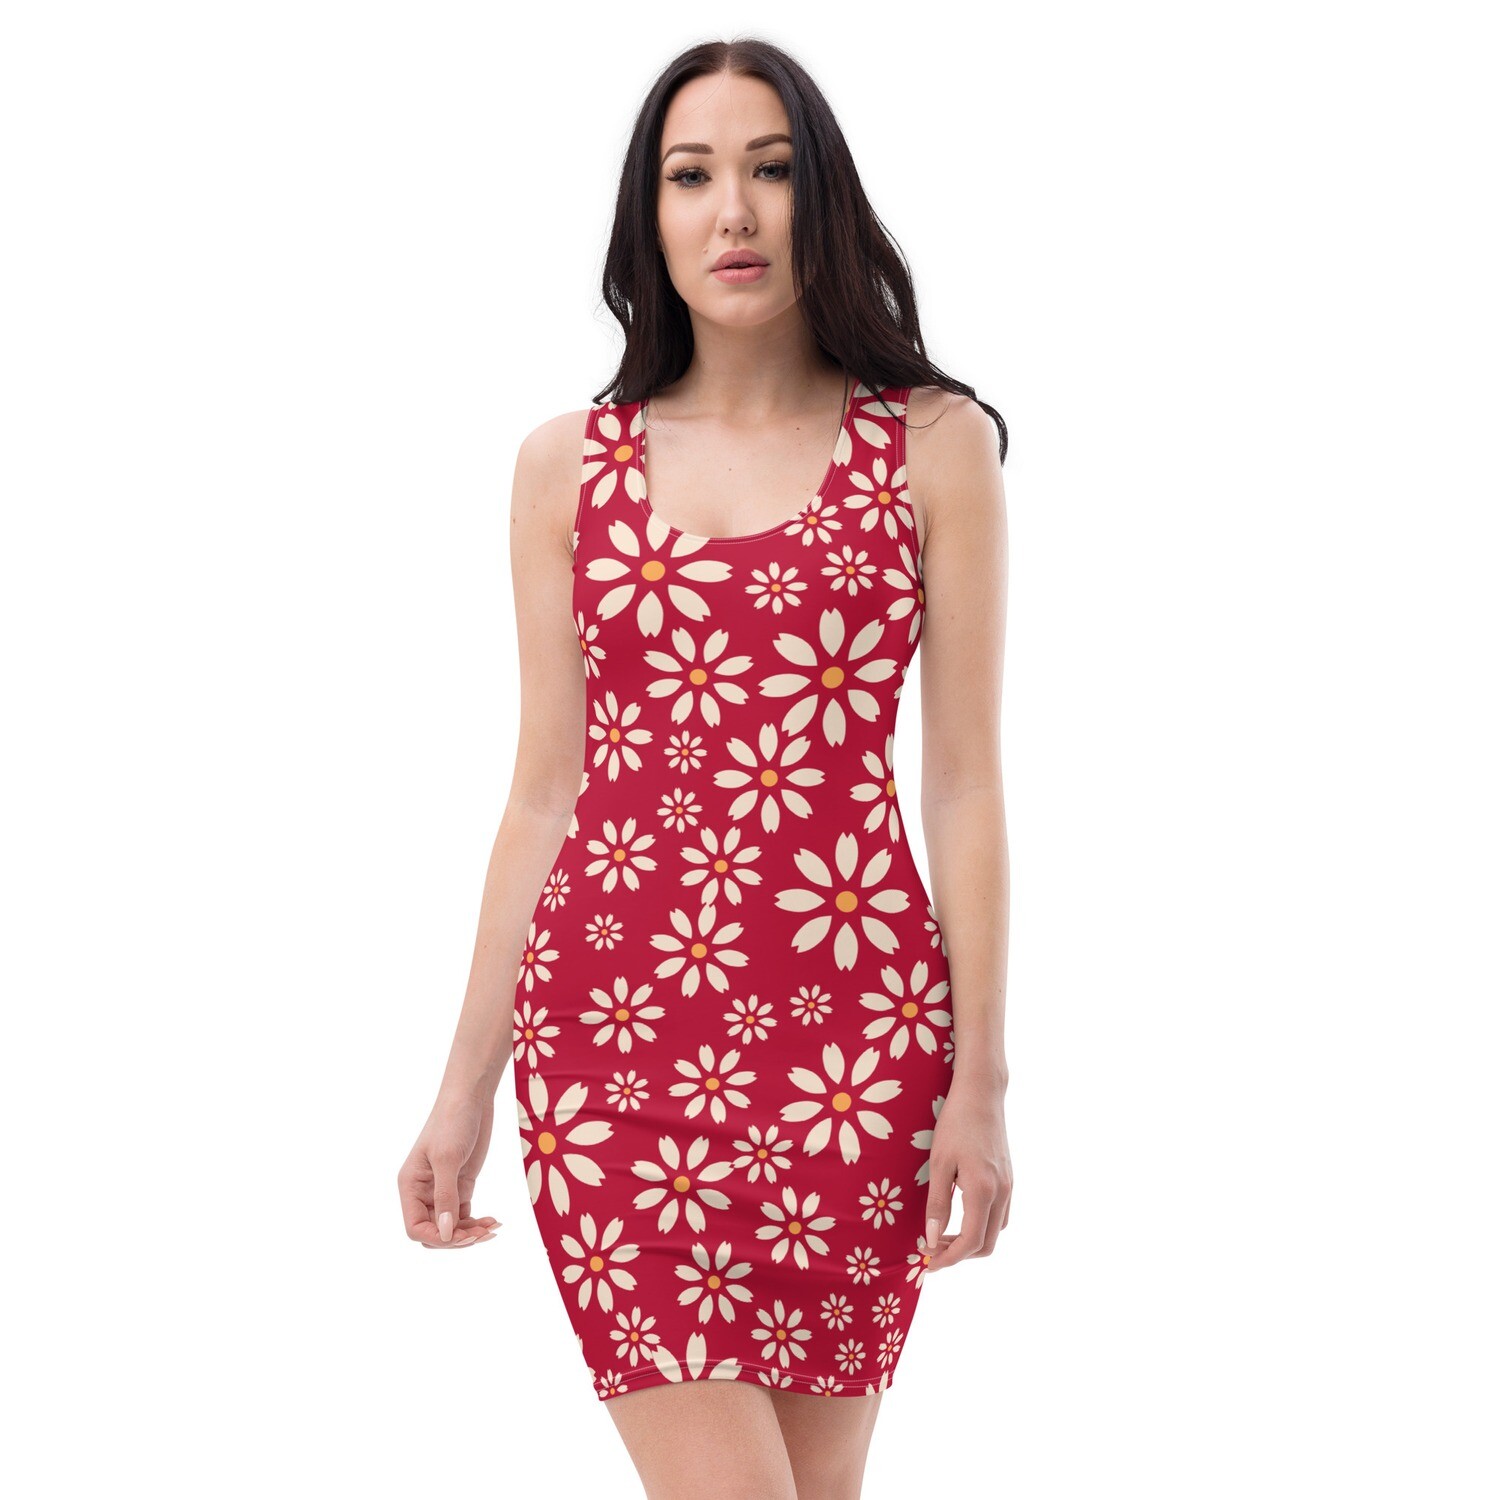 Hibiscus red bodycon dress with retro floral pattern in sizes XS-XL